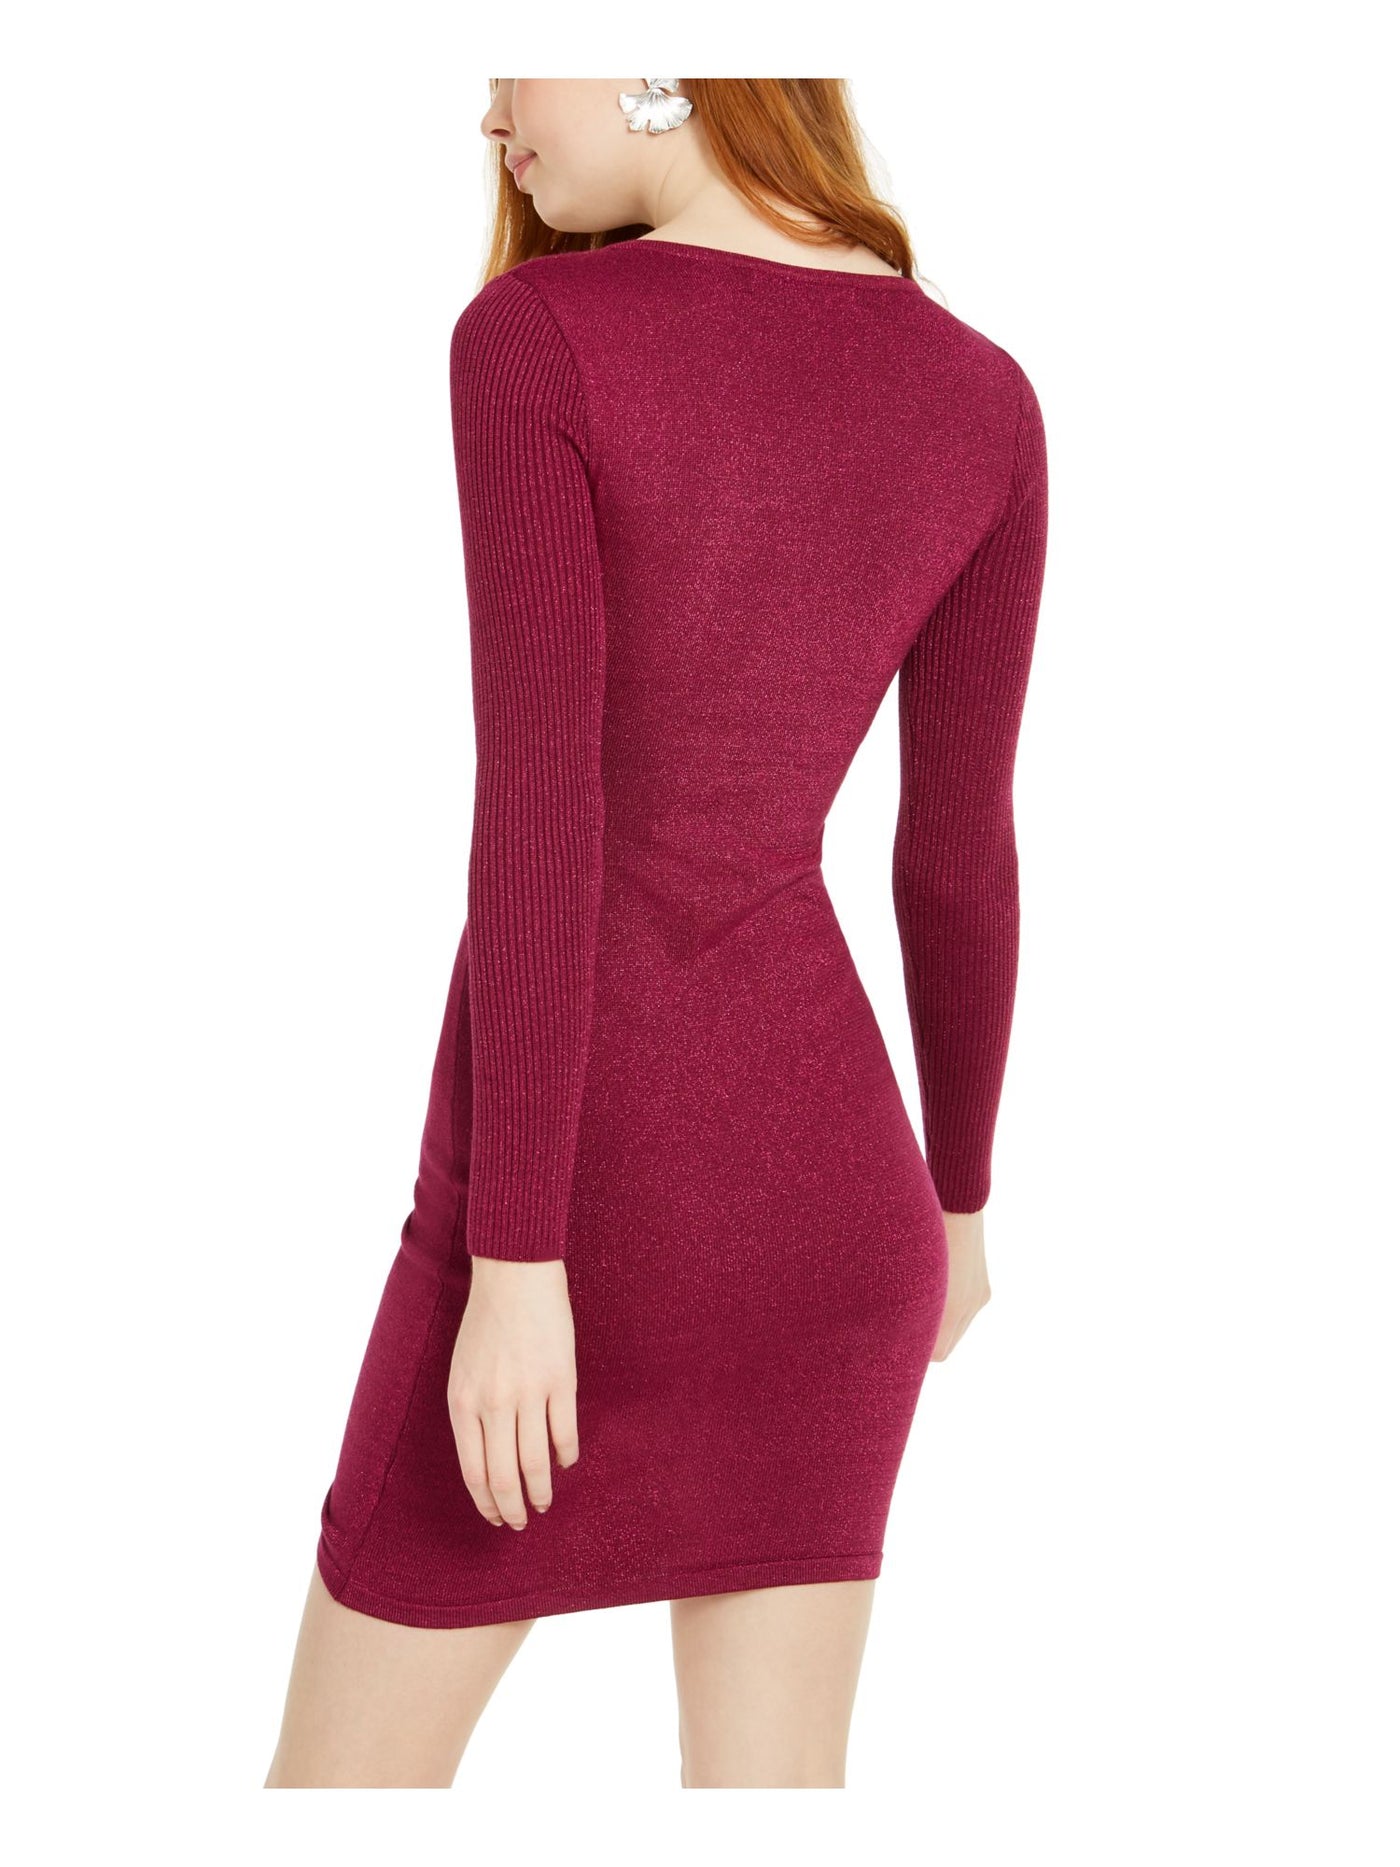 CRAVE FAME Womens Purple Ruched Long Sleeve V Neck Short Party Body Con Dress Juniors S